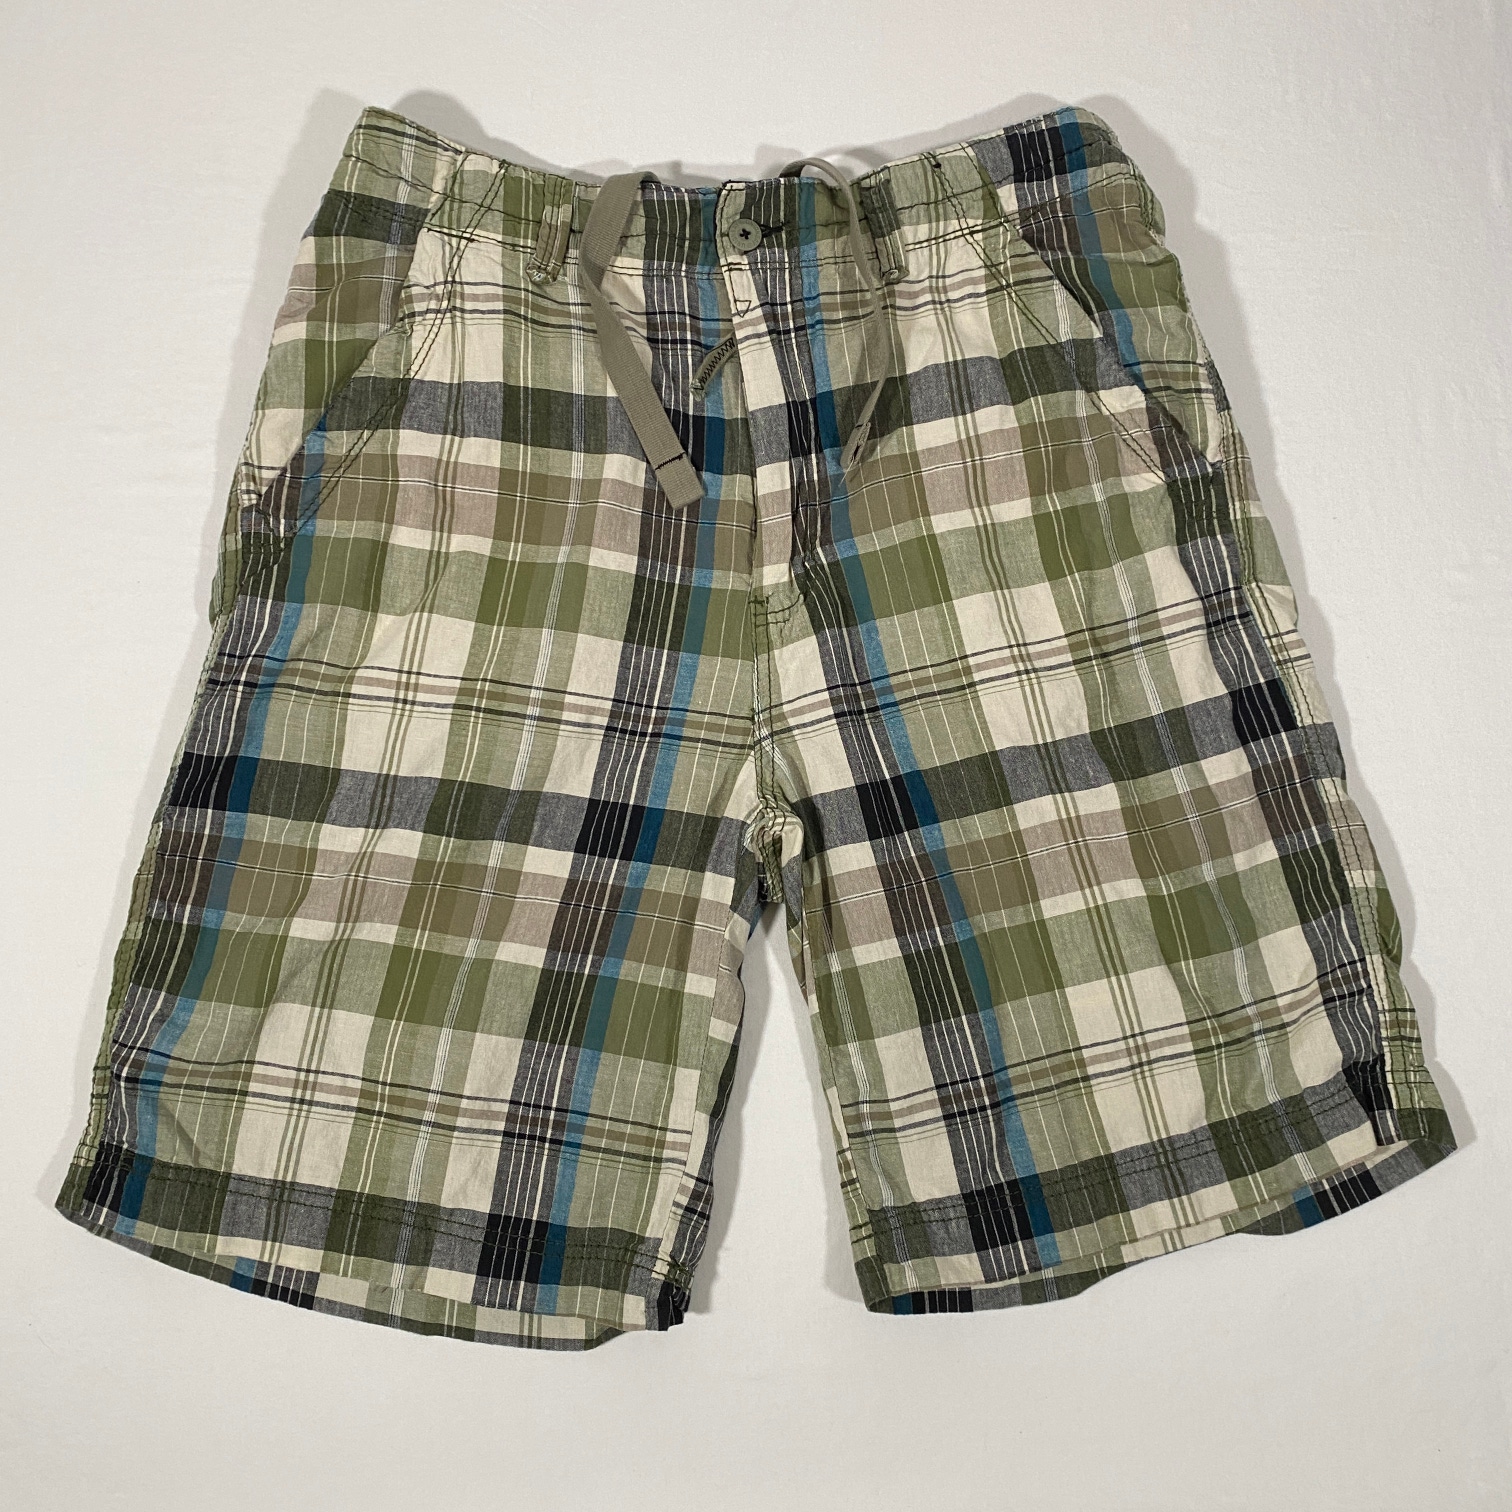 UNIONBAY Men's Size 34 Green Plaid Flat Front 100% Cotton Casual Chino Shorts